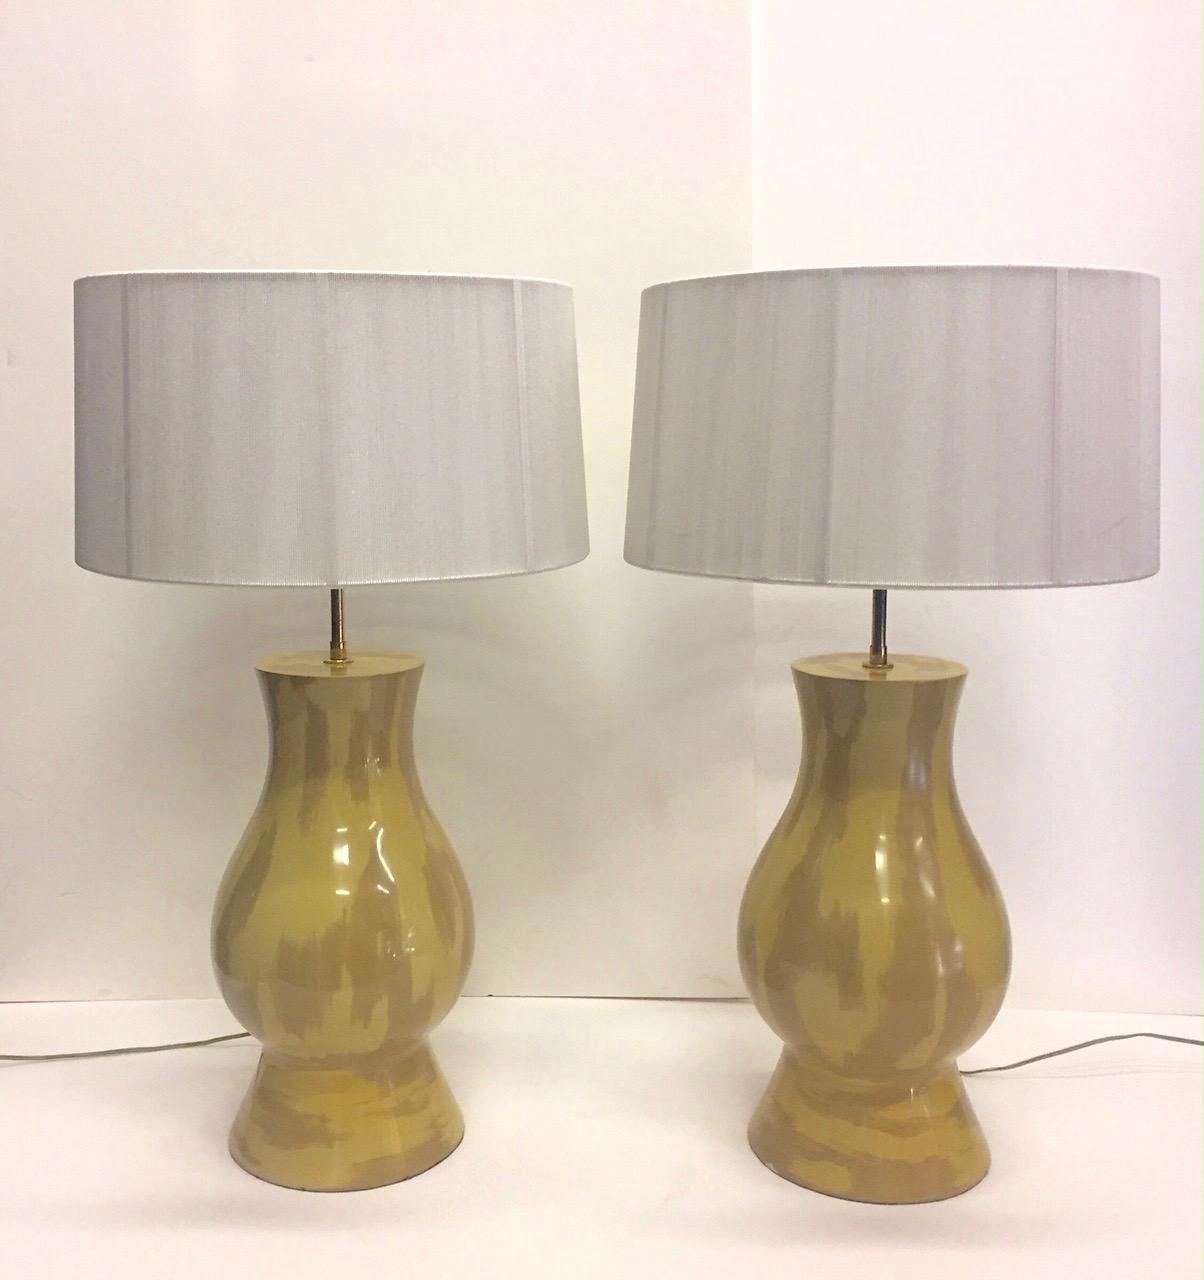 A rare valuable pair of Karl Springer hand painted table lamps in mustard and khaki with an abstract loose zebra-esque pattern.
Adjustable rod, two sockets 60 watt each

Note: String shades optional but will add cost to shipping.